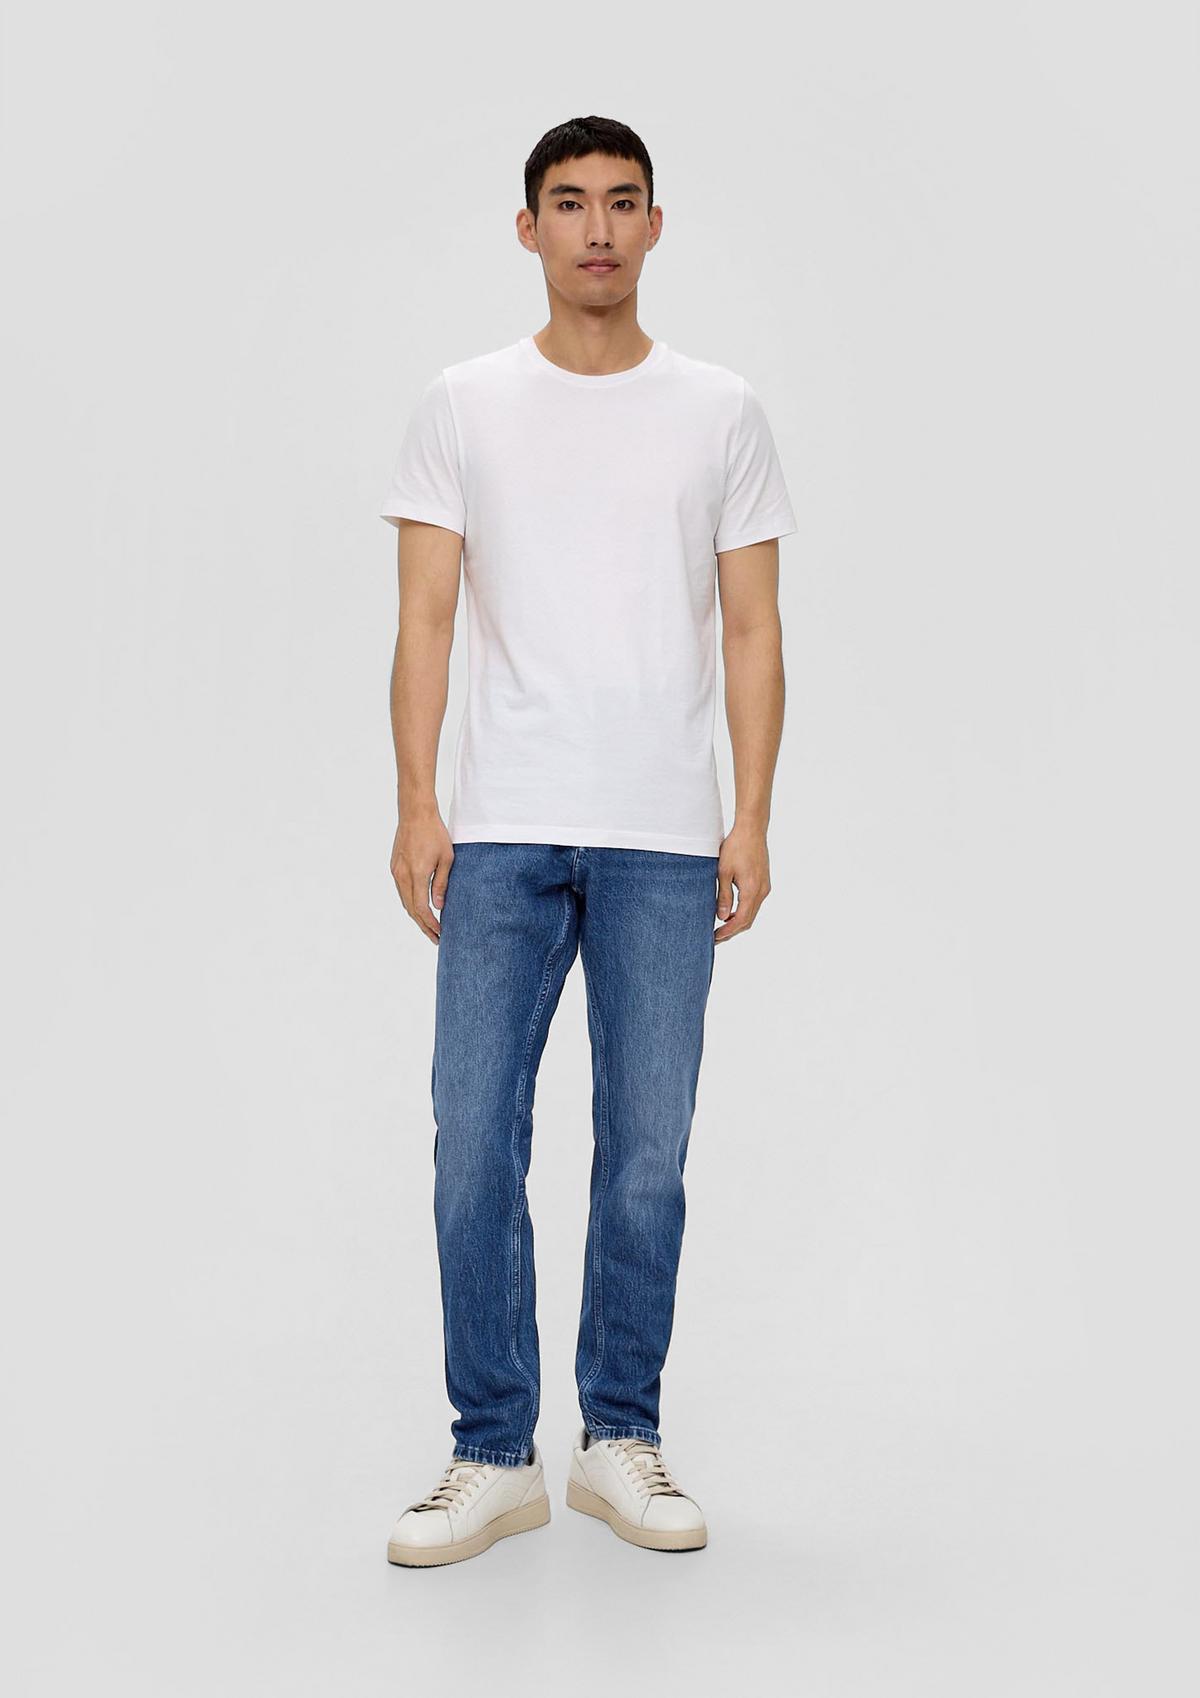 Jeans Mauro / Regular Fit / High Rise / Tapered Leg 